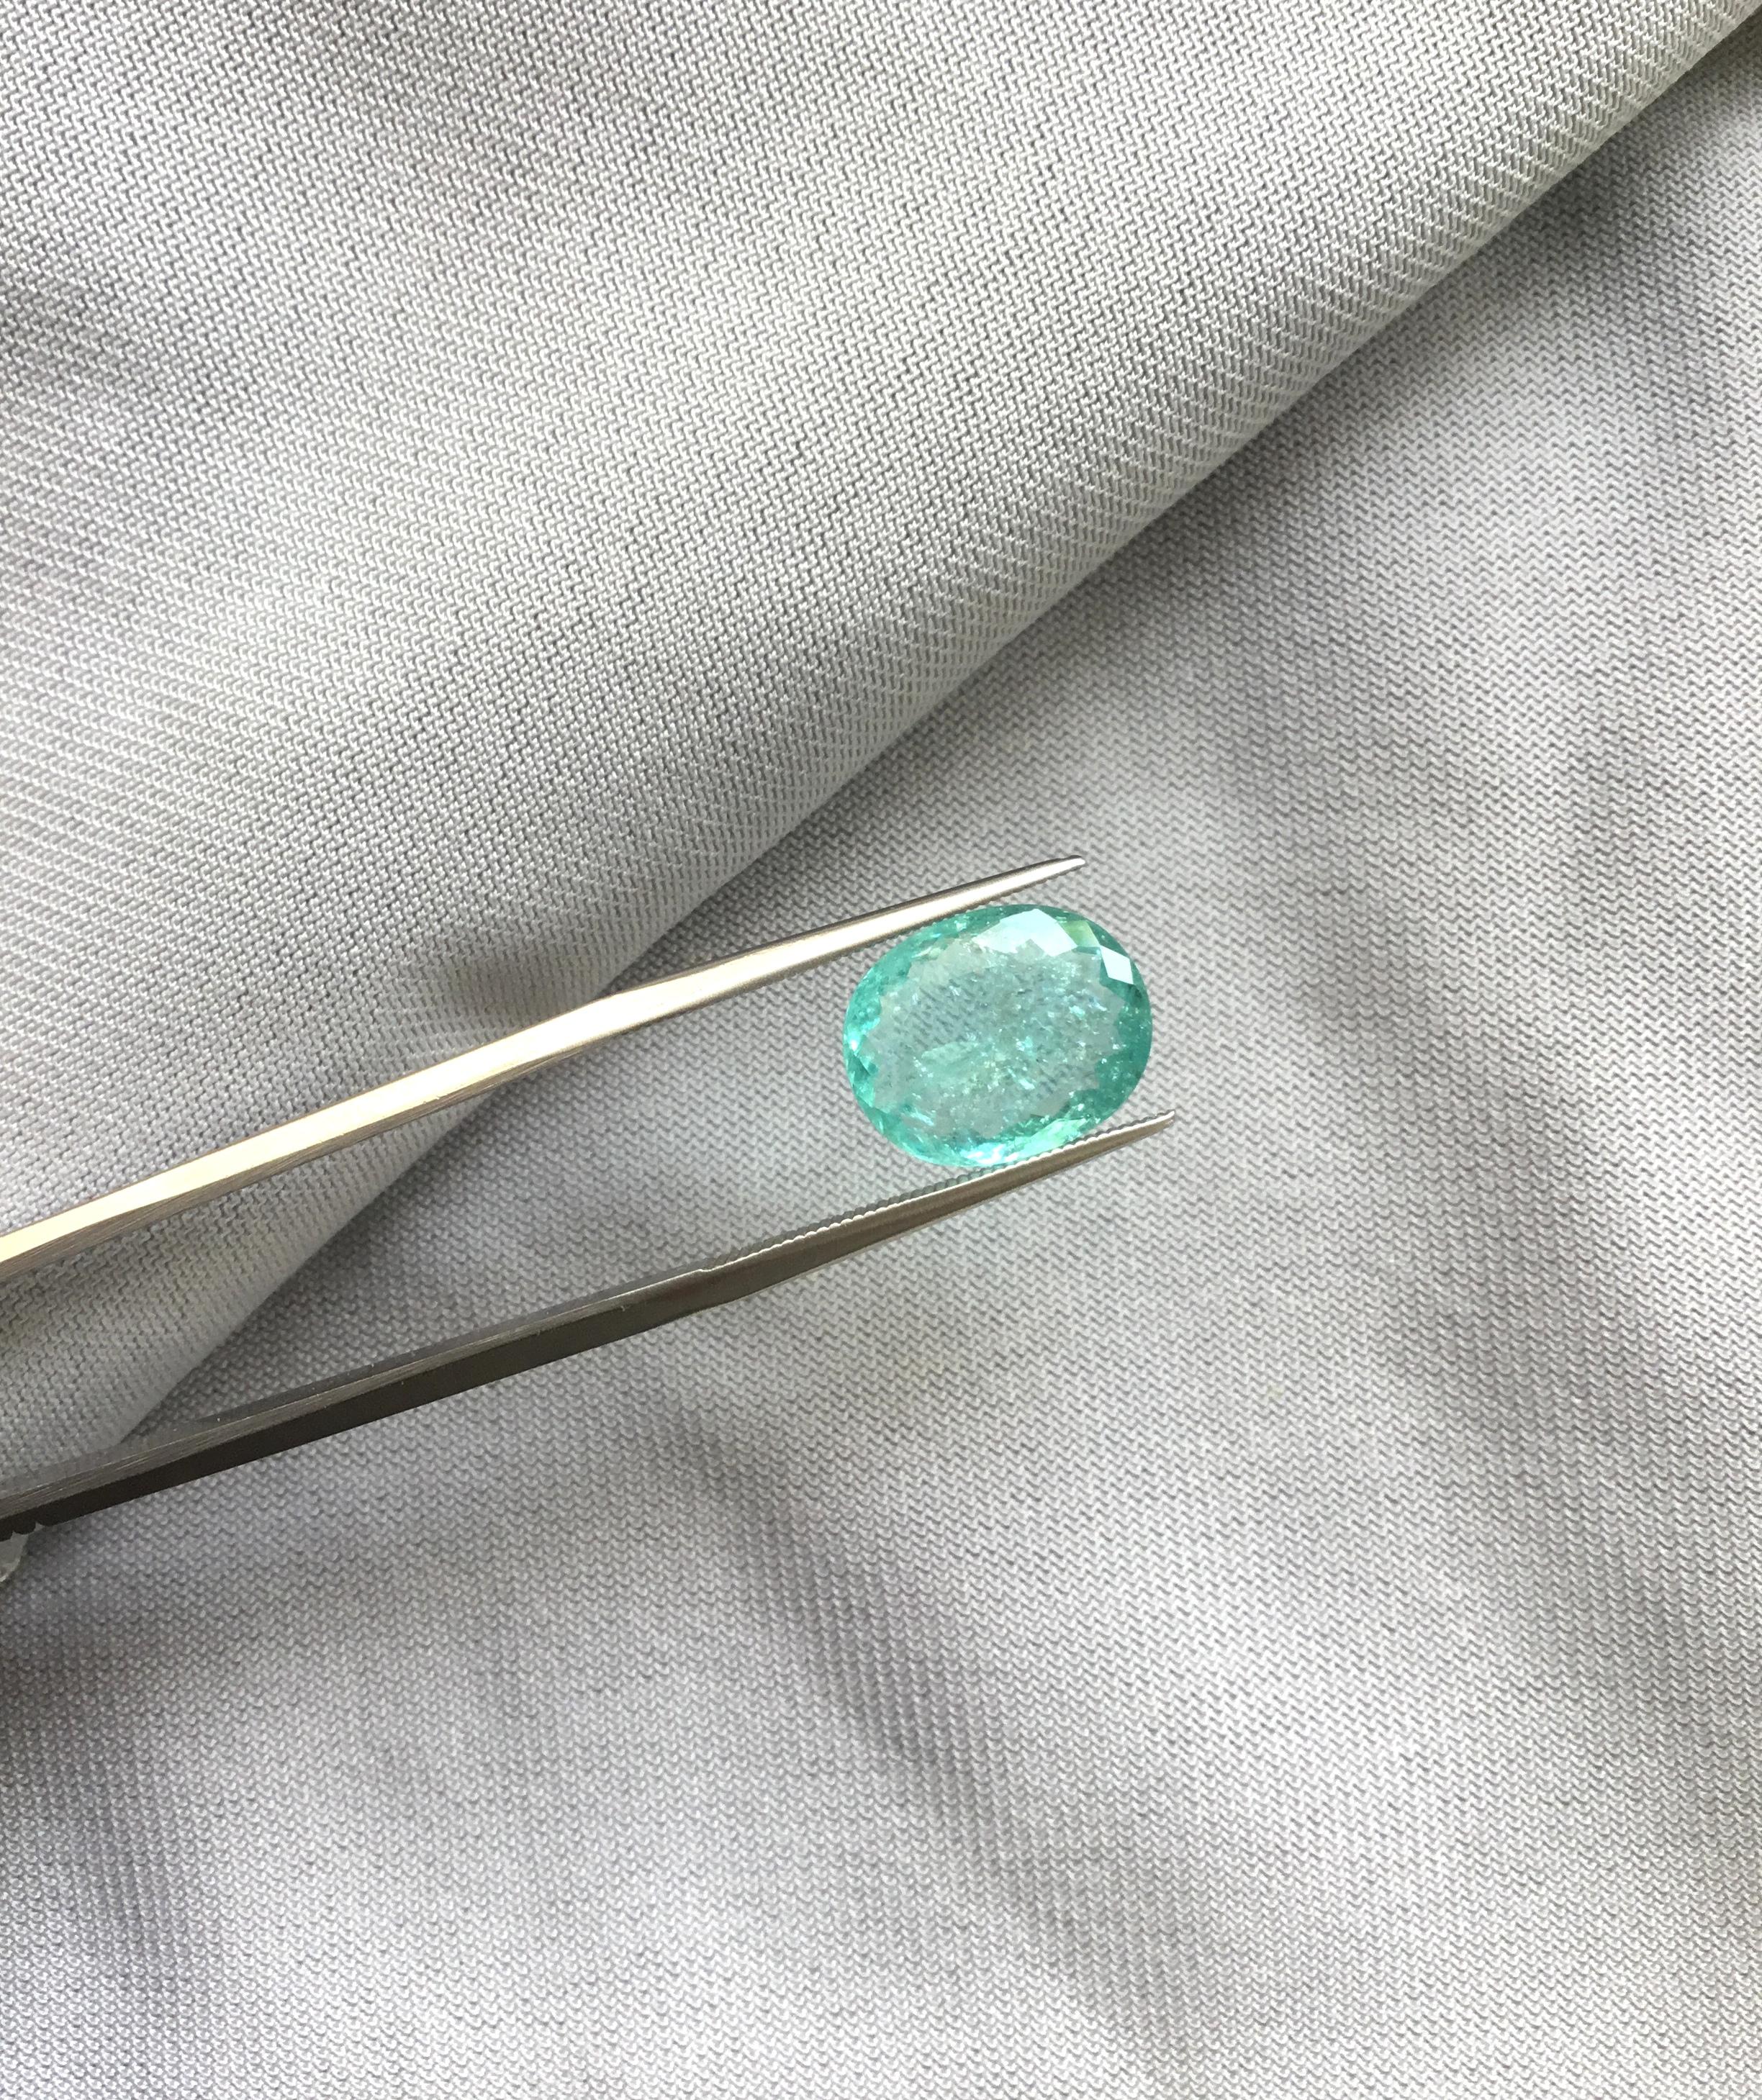 Exceptional 4.11 Carats Paraiba Tourmaline Oval Cut Stone for Fine Jewelry